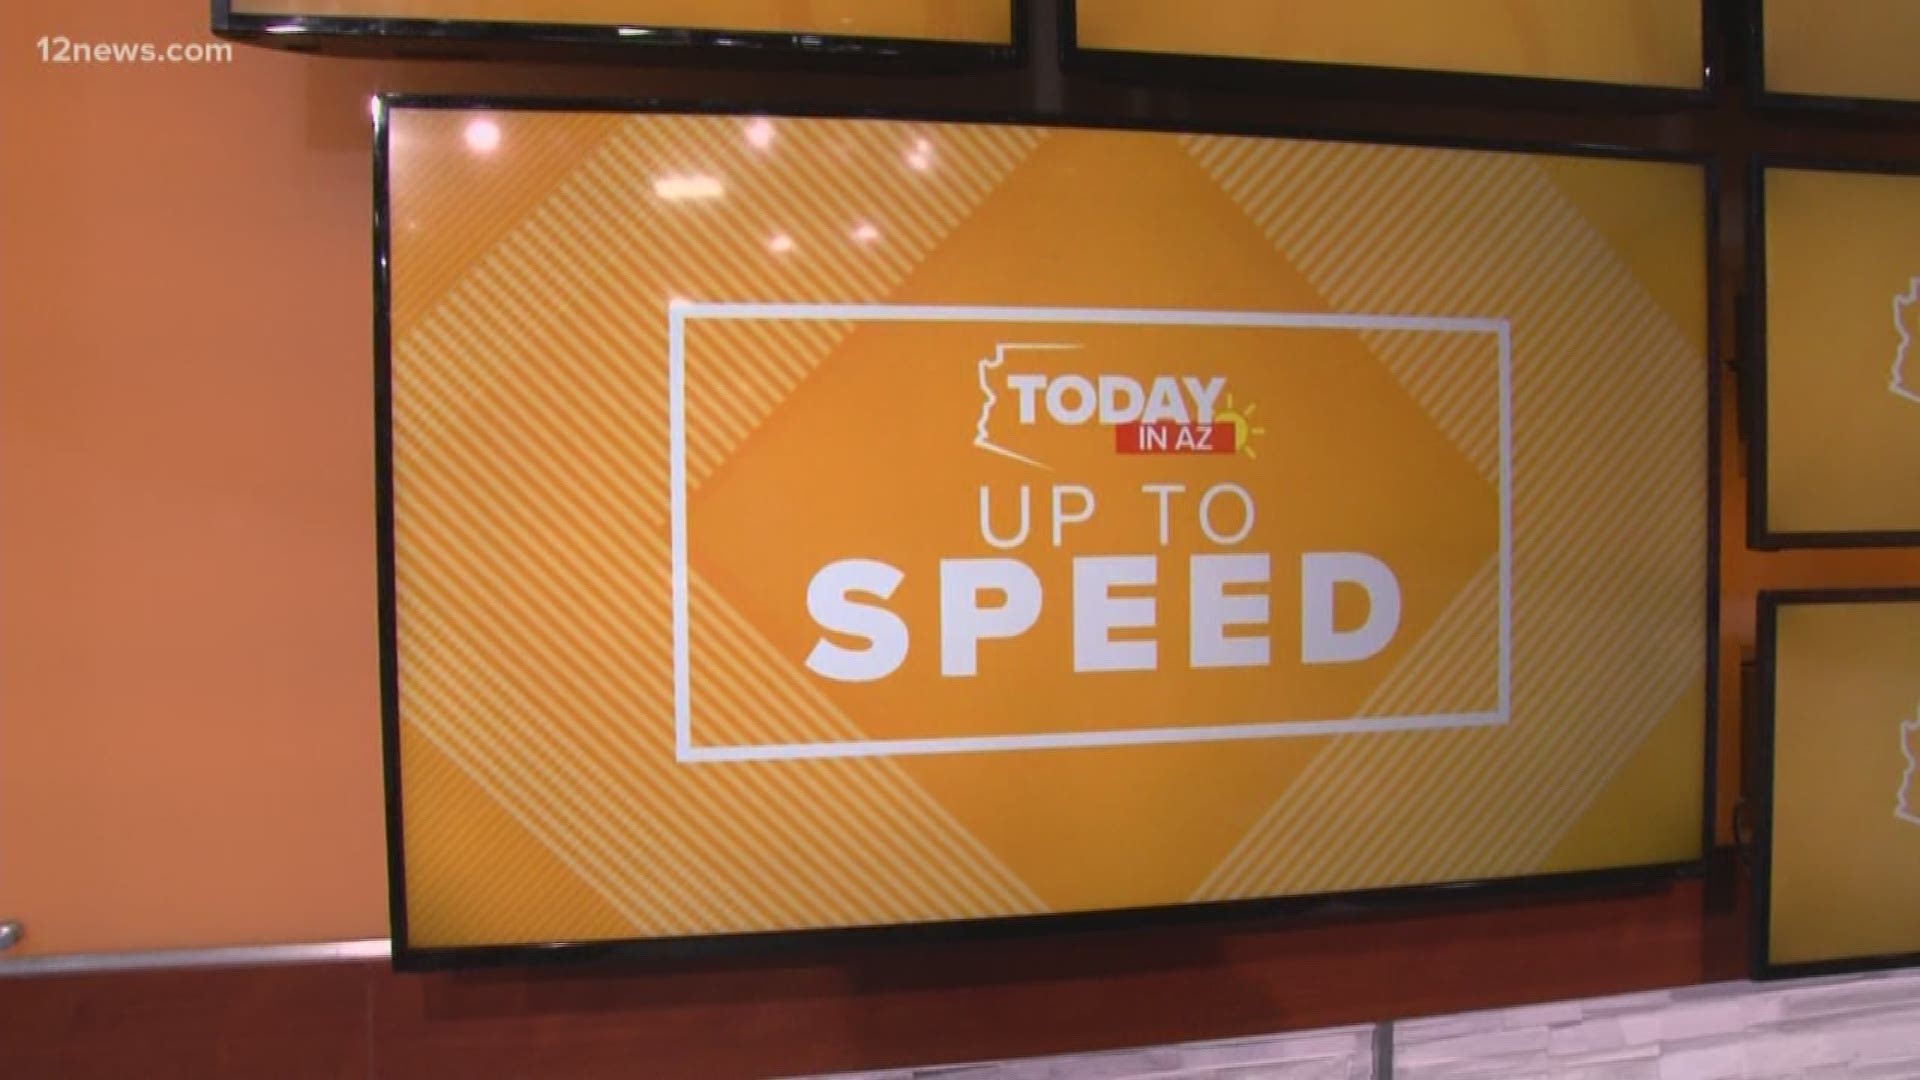 We get you "Up to Speed" on the latest news happening in the Valley and across the country on Monday morning.